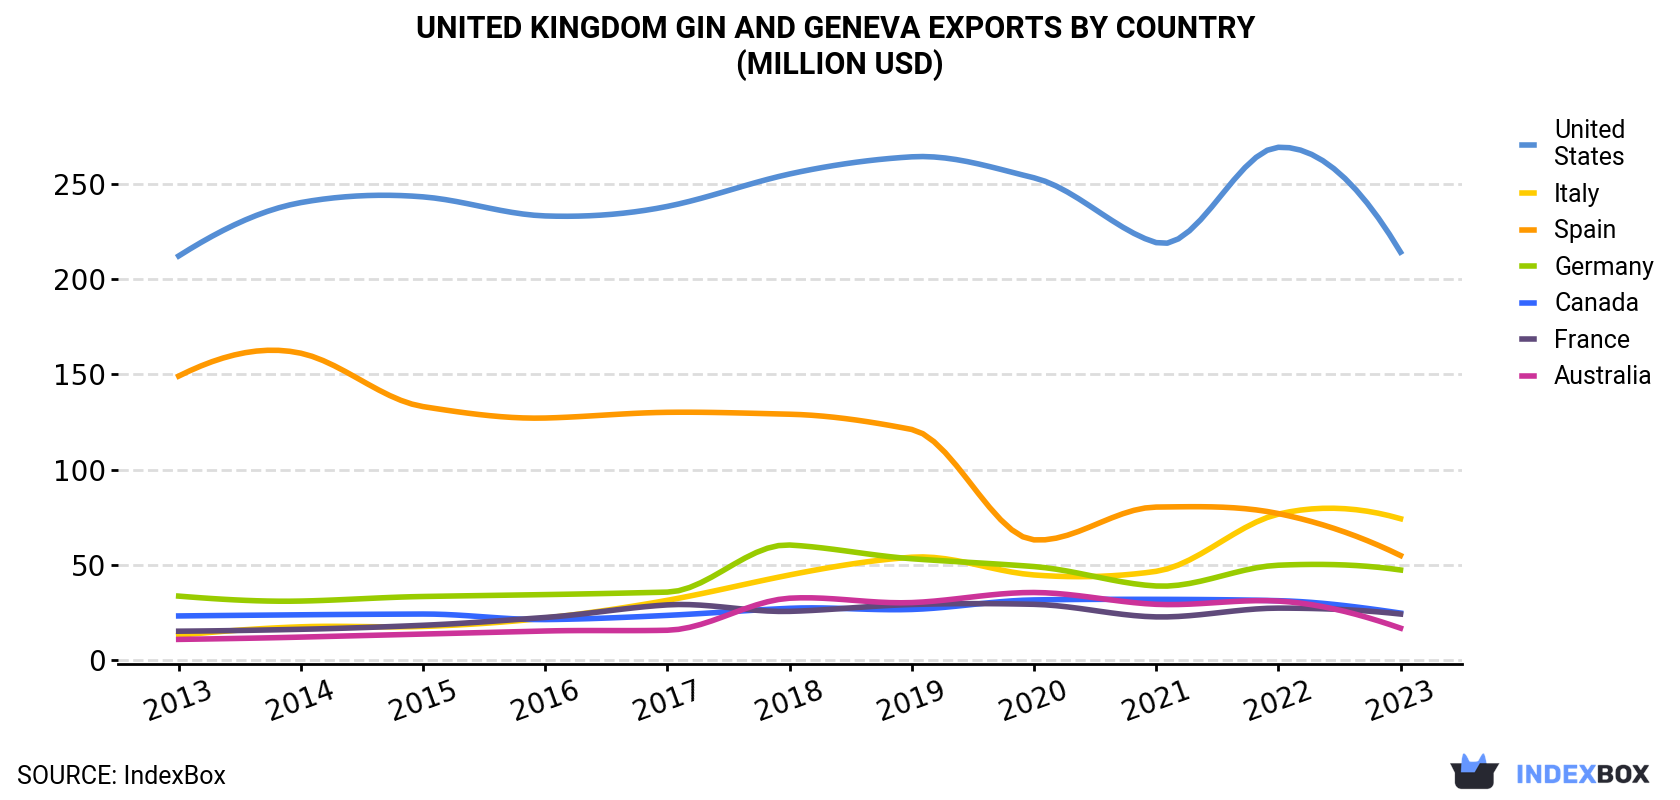 United Kingdom Gin And Geneva Exports By Country (Million USD)